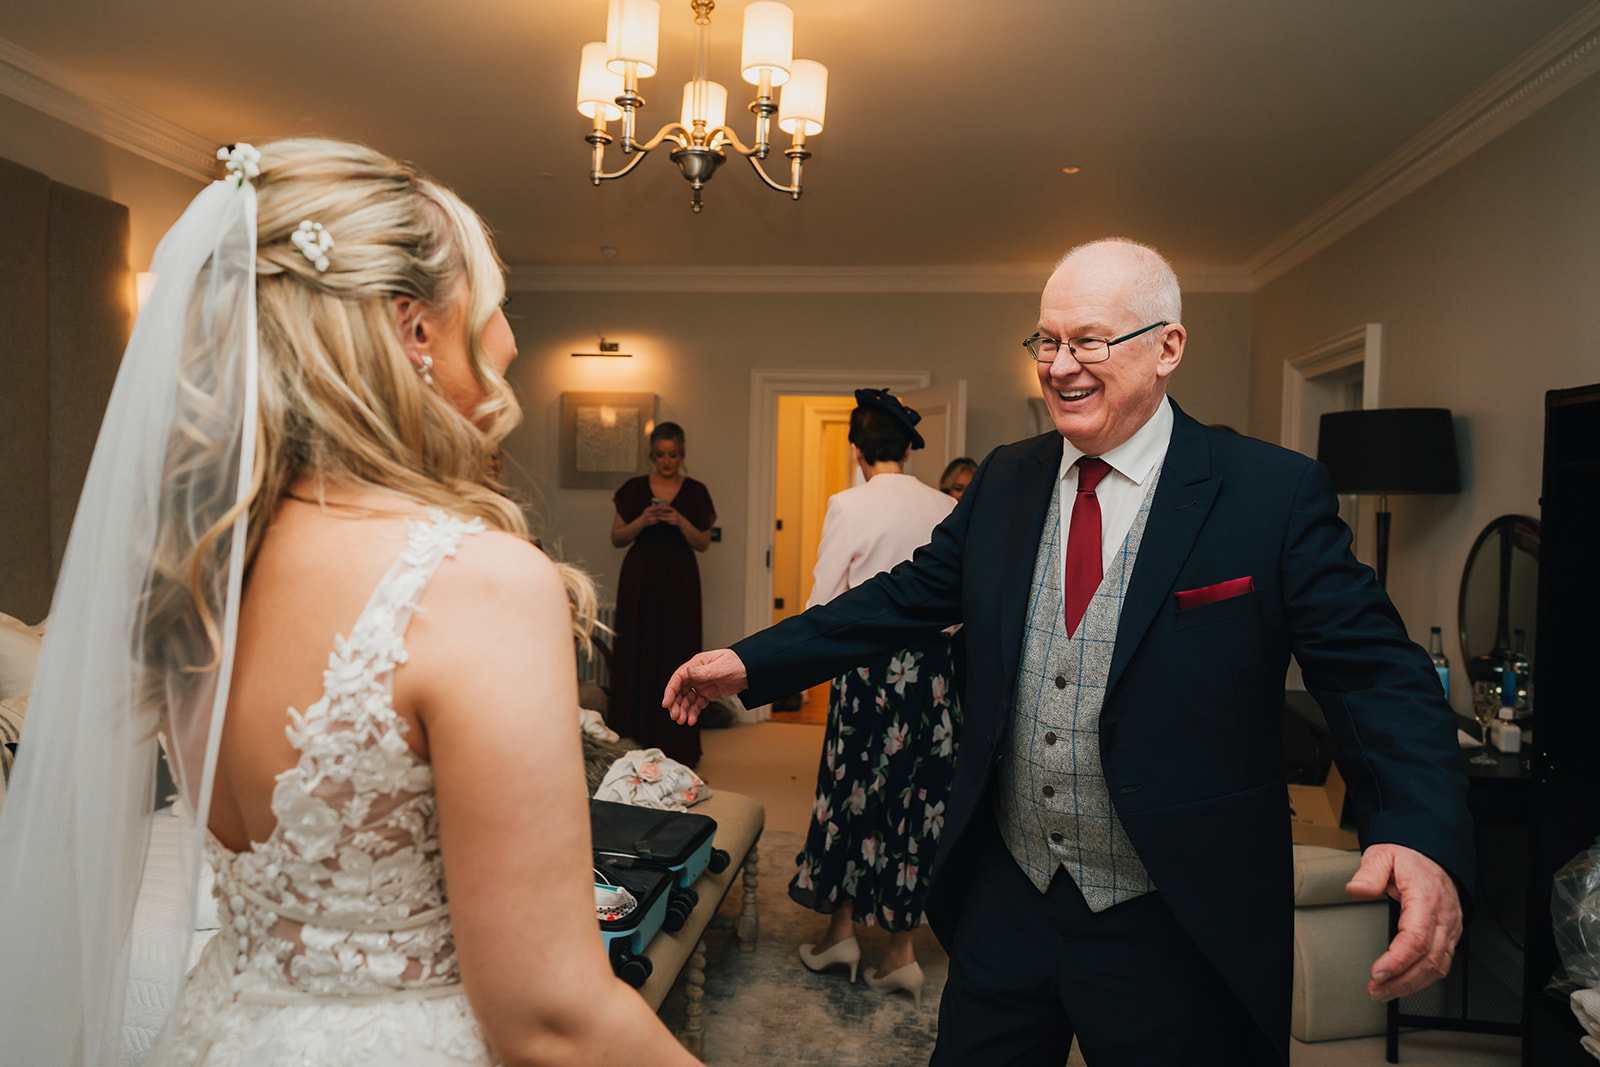 the father of the groom see's his daughter in her bridal gown for the first time